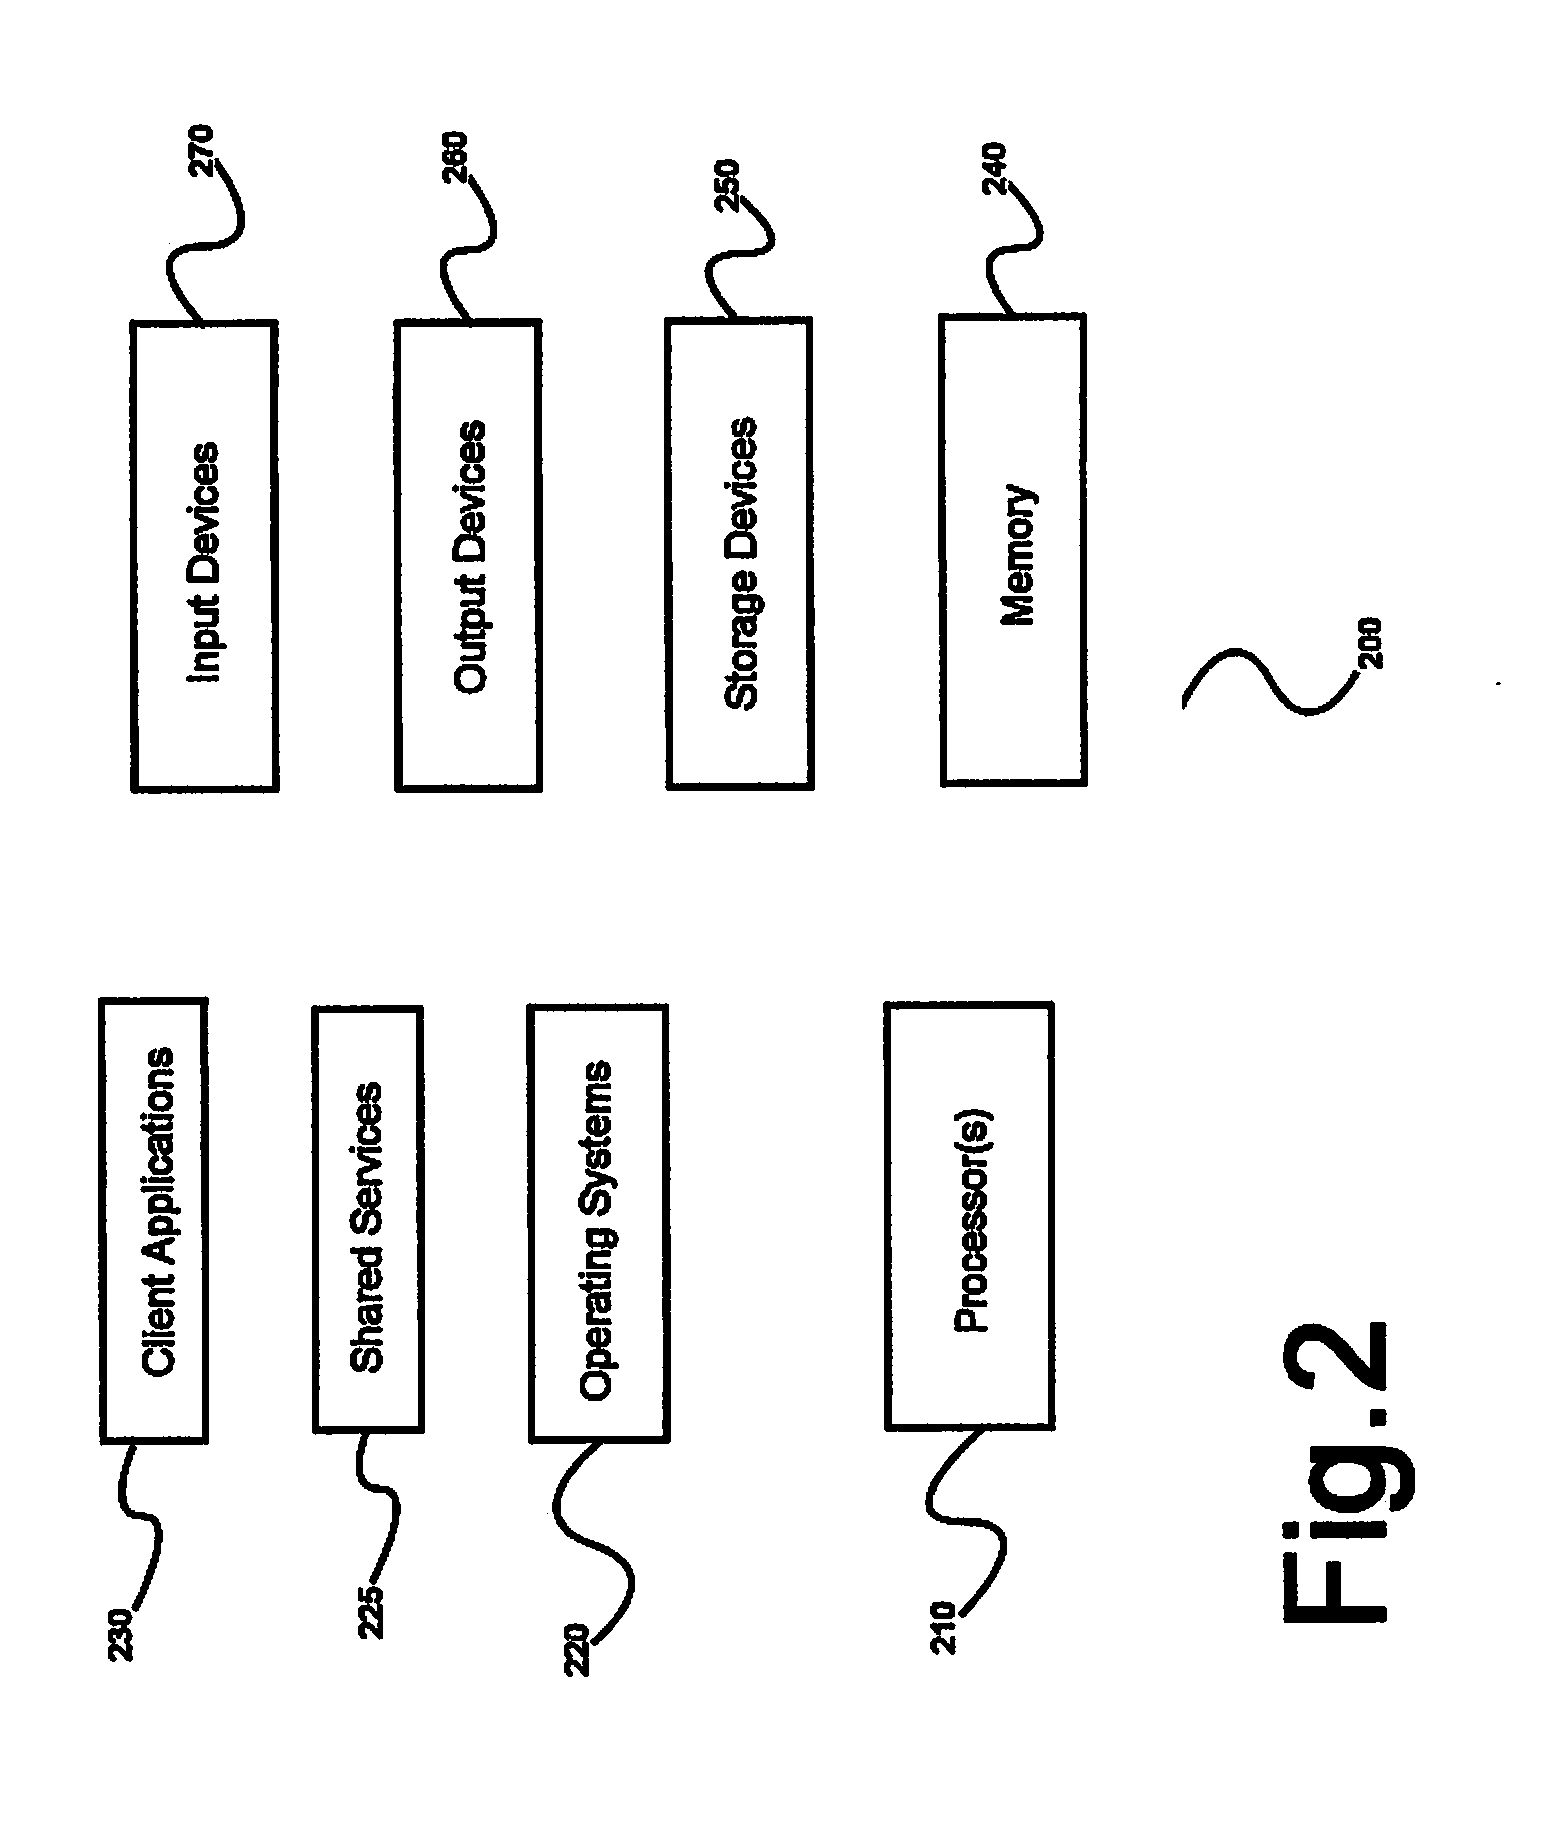 System and method for tag-based social networking